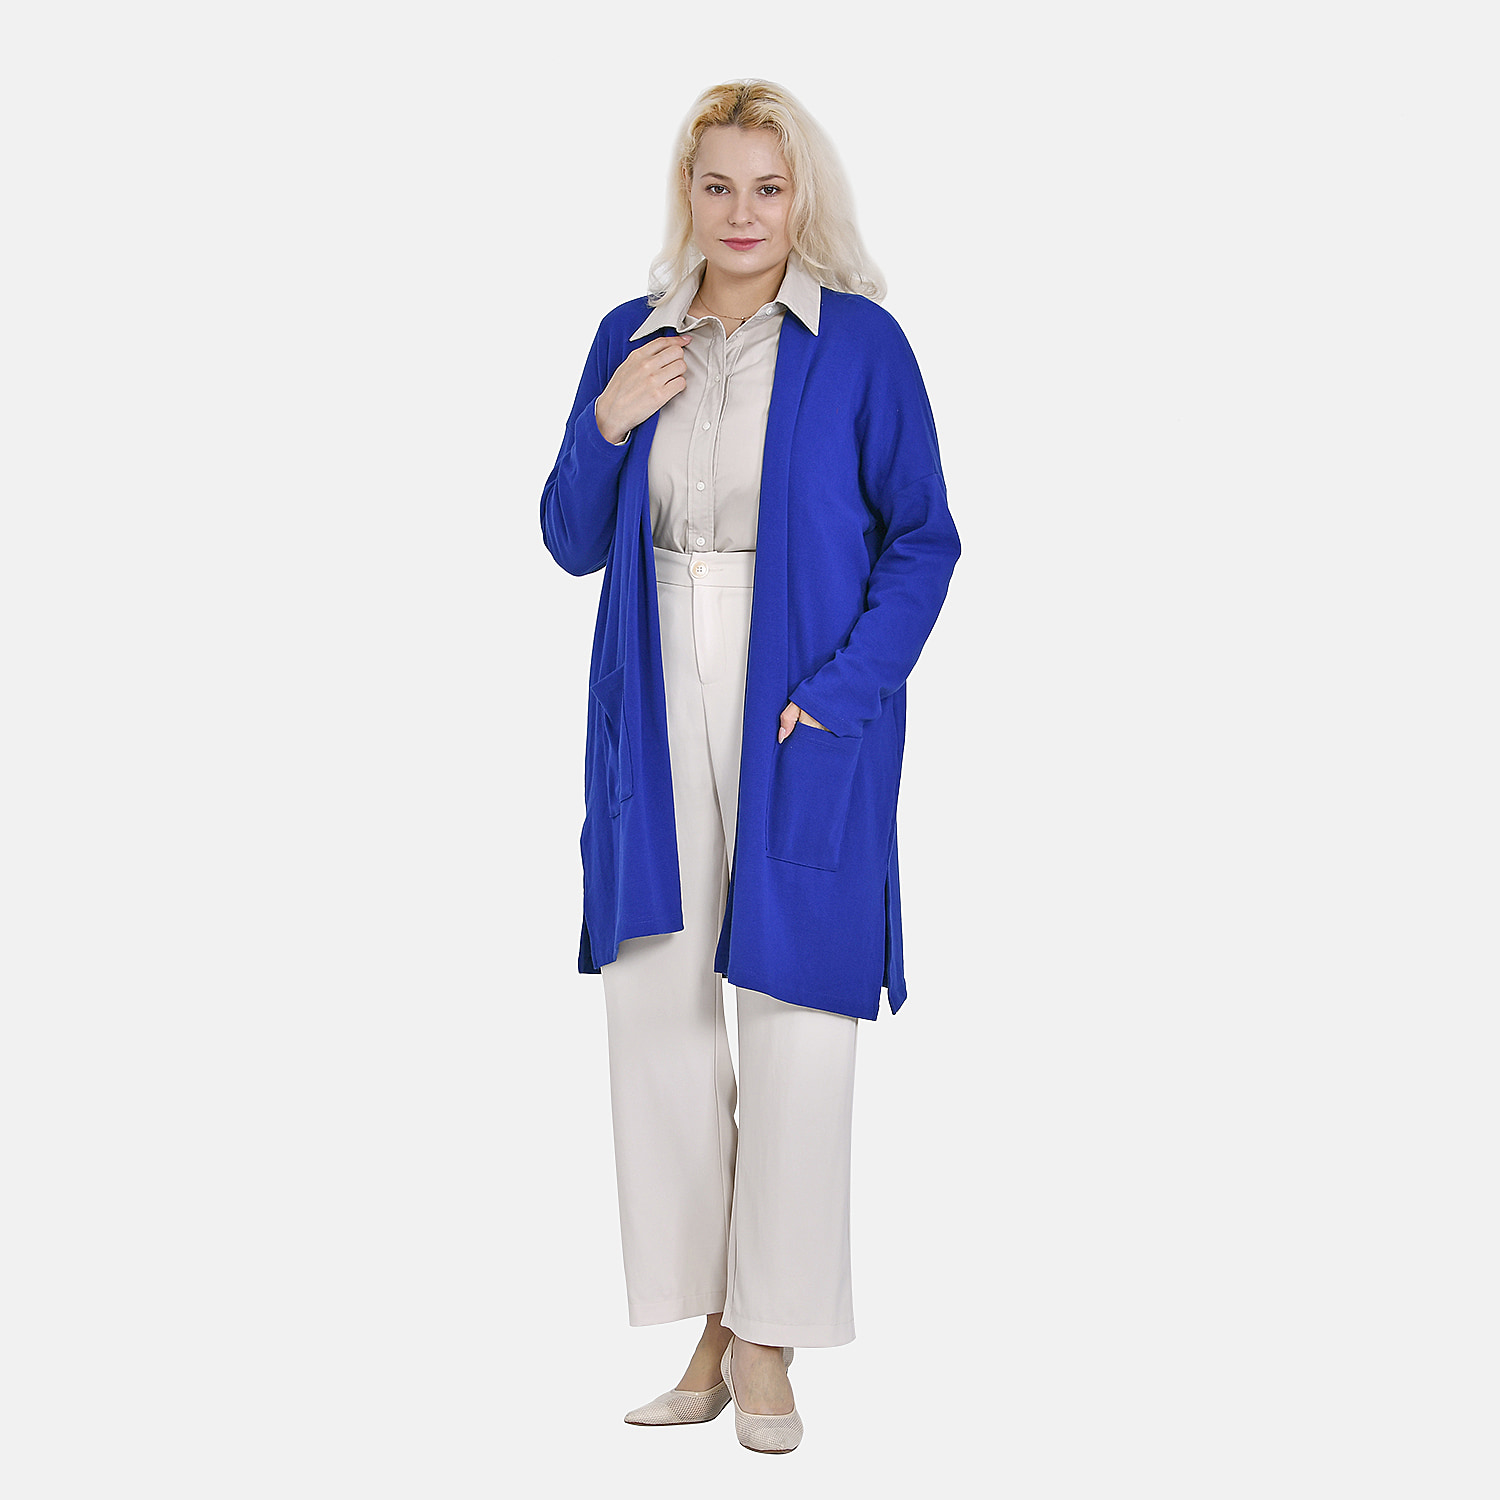 Tamsy 60% Cotton Blend Jersey Cardigan (One Size, 8-20) - Cobalt